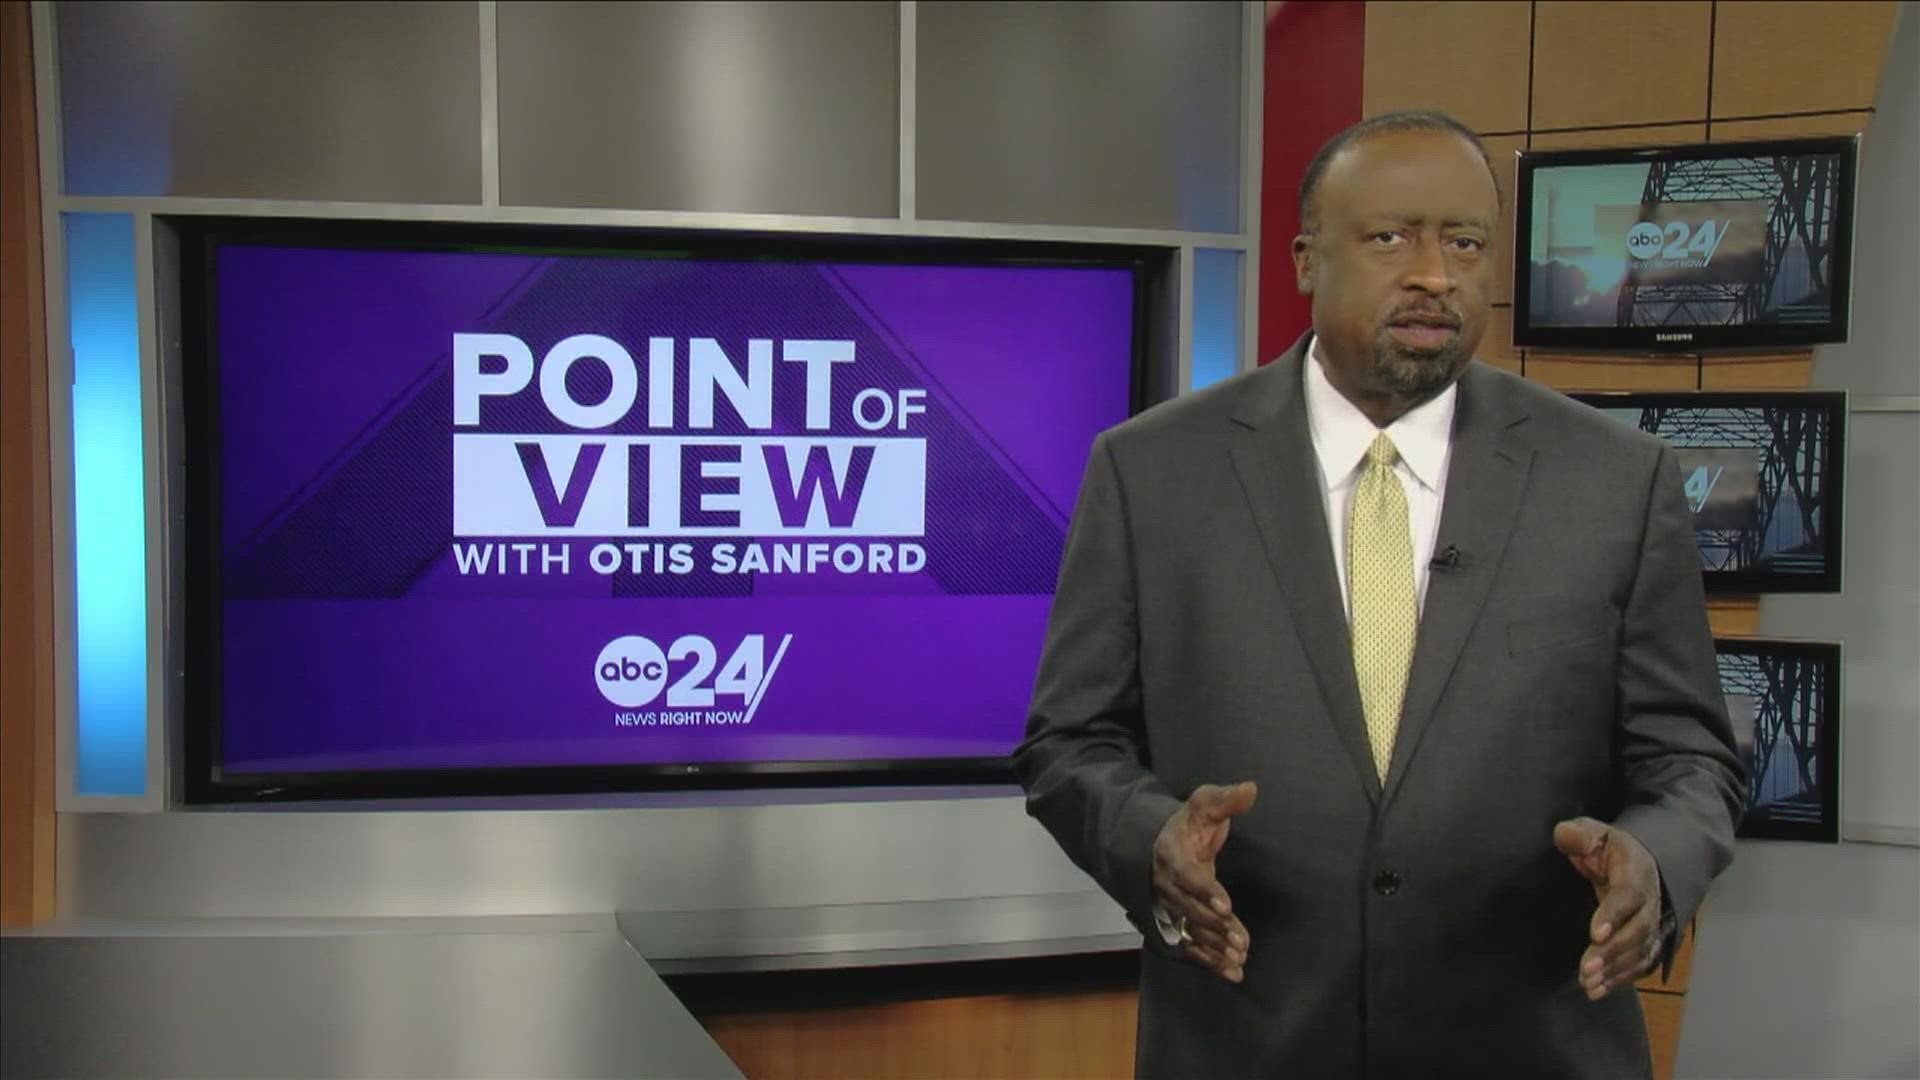 ABC 24 political analyst and commentator Otis Sanford shared his point of view on appointing a new Tennessee state senator for District 33.